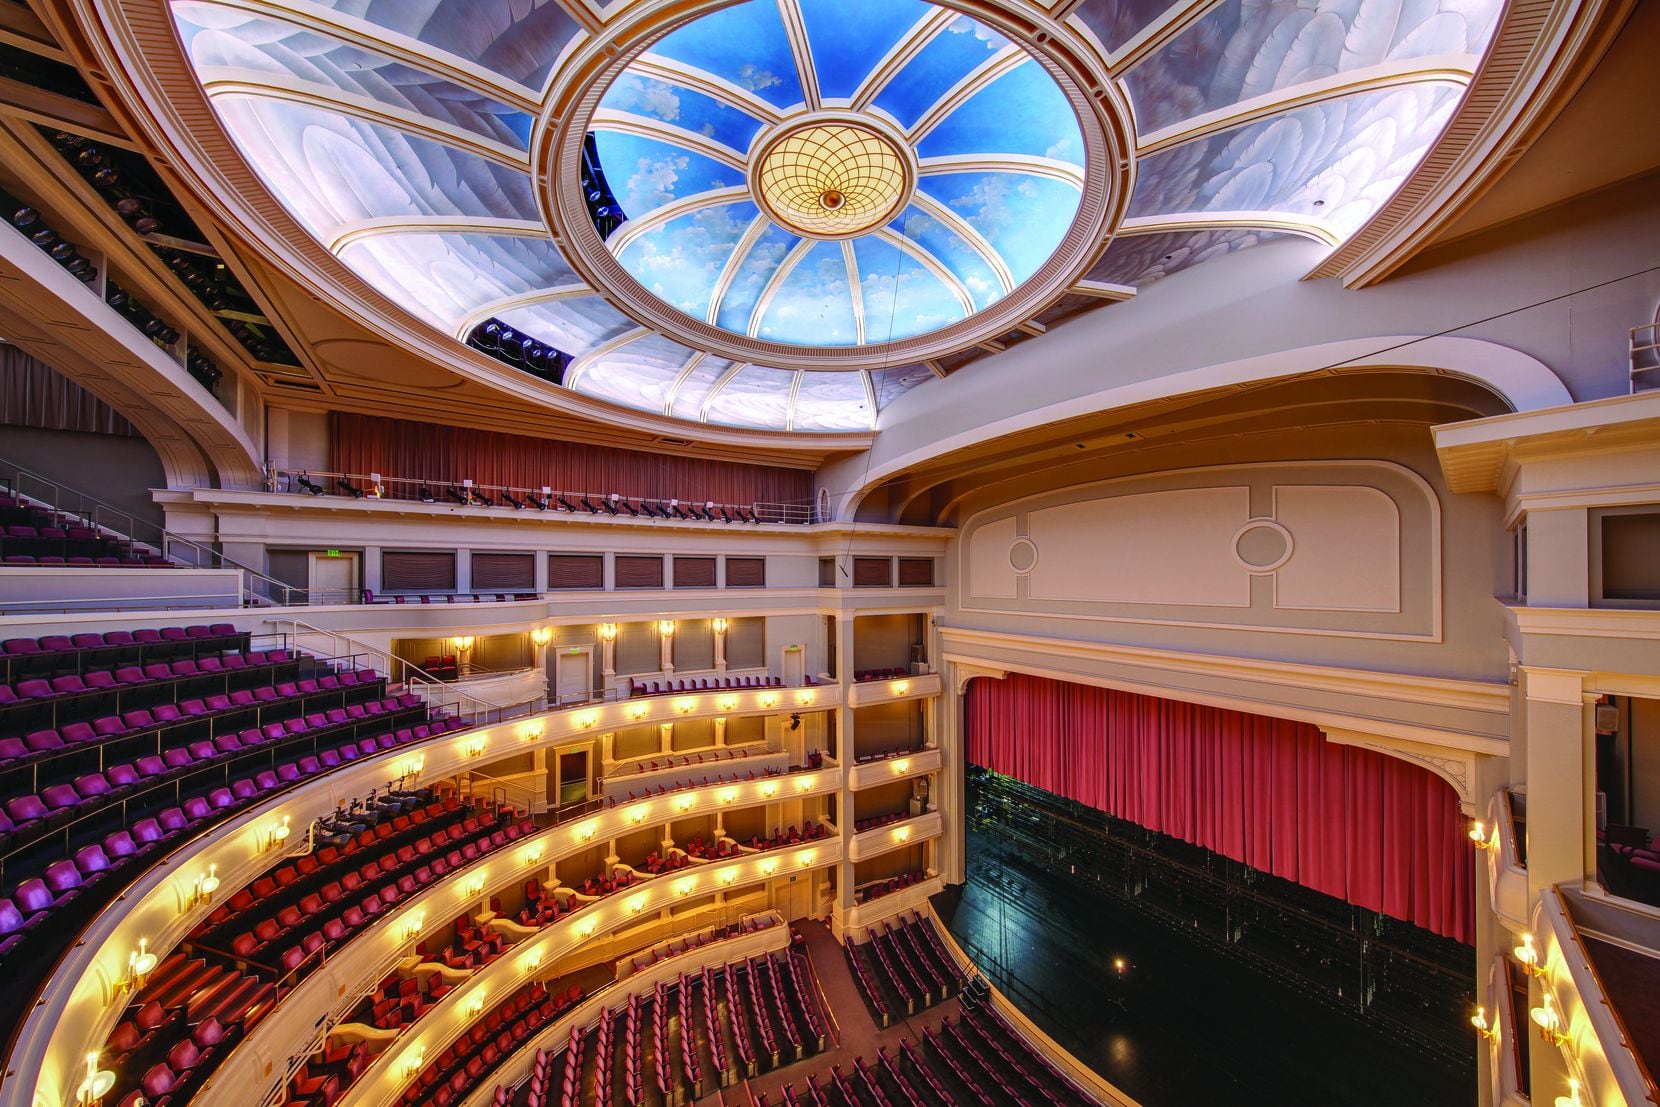 Fort Worth's Bass Performance Hall, courtesy of Performing Arts Fort Worth.